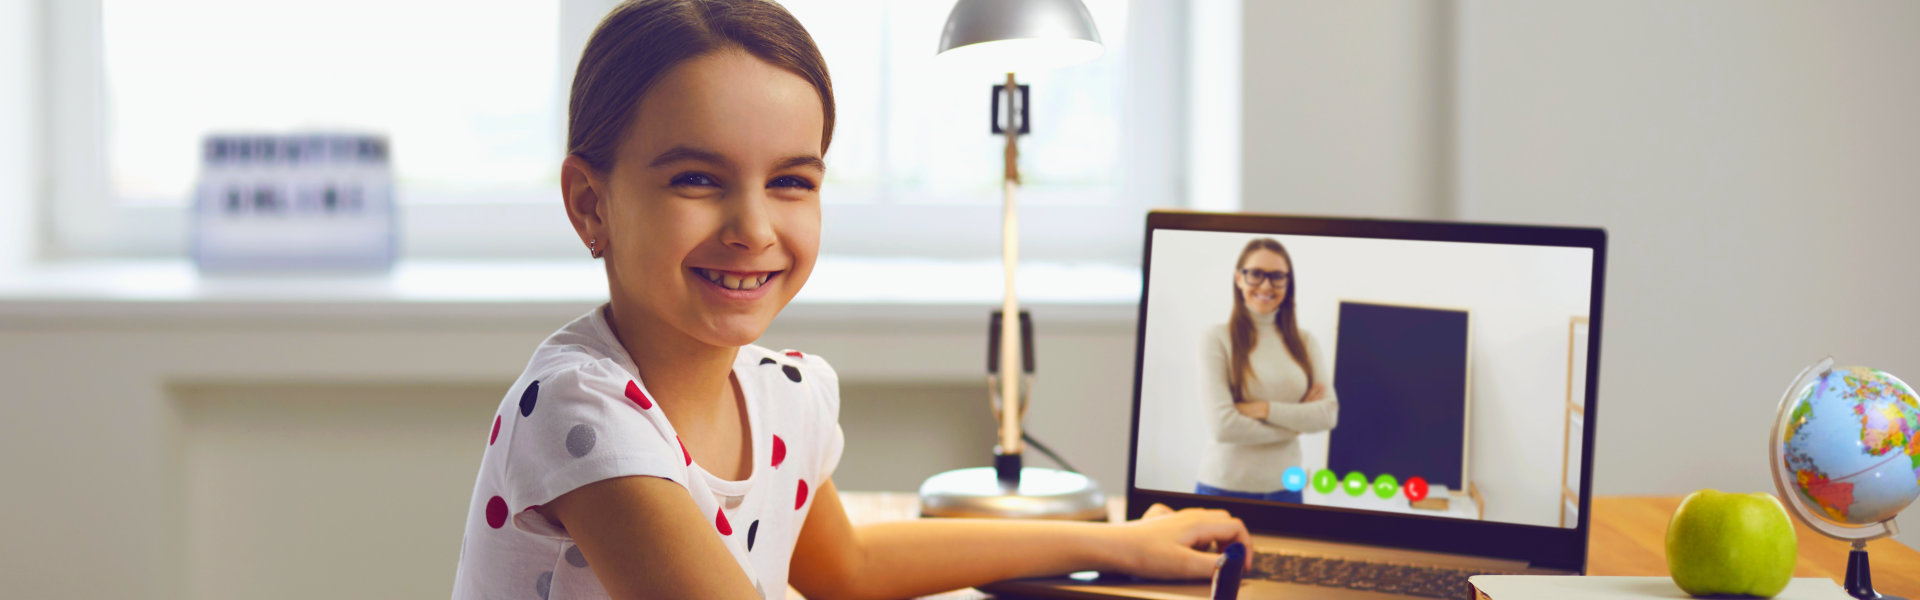 little girl smiling while using laptop